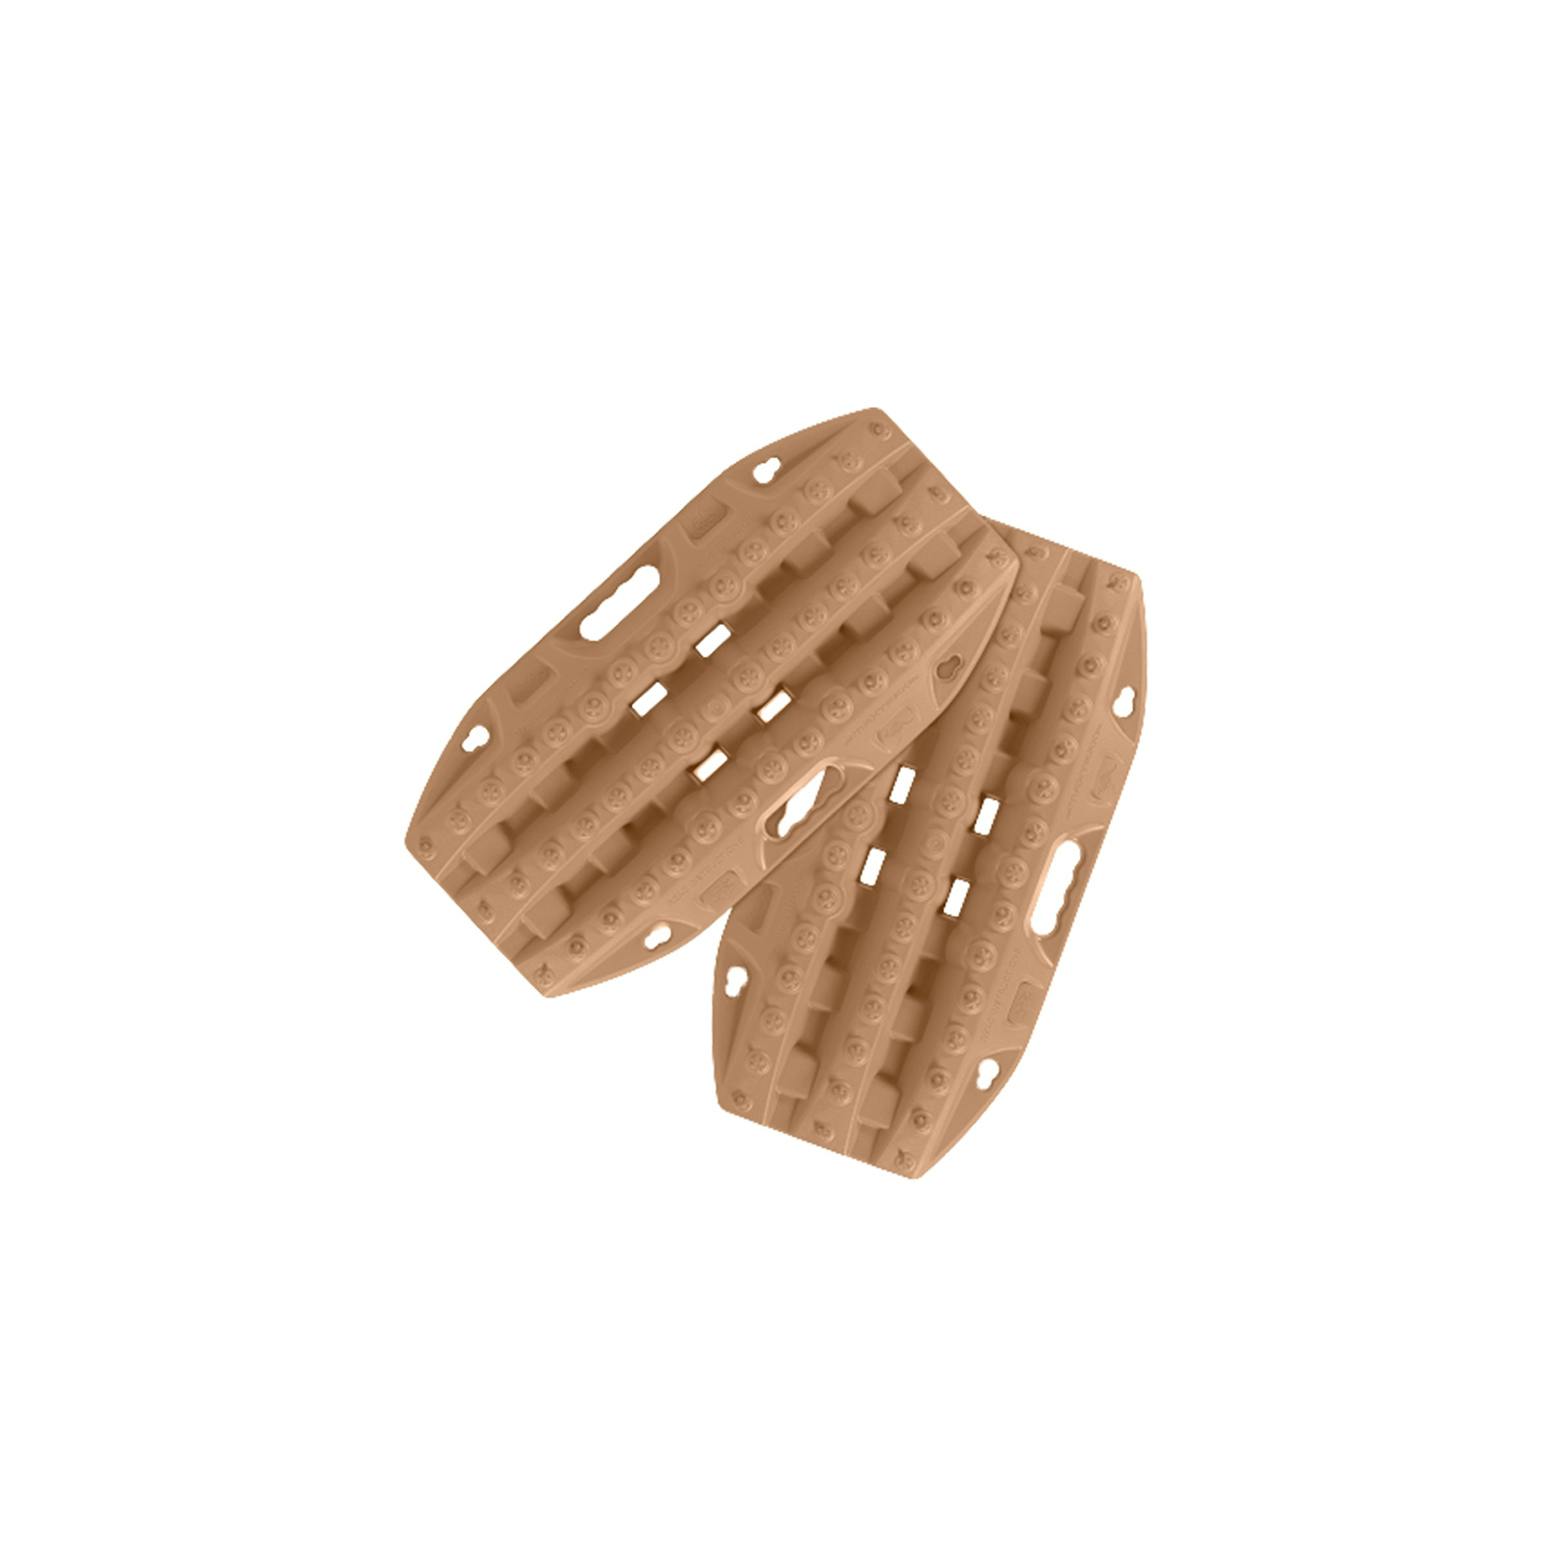 Maxtrax Mini Recovery Boards in Desert Tan on white background